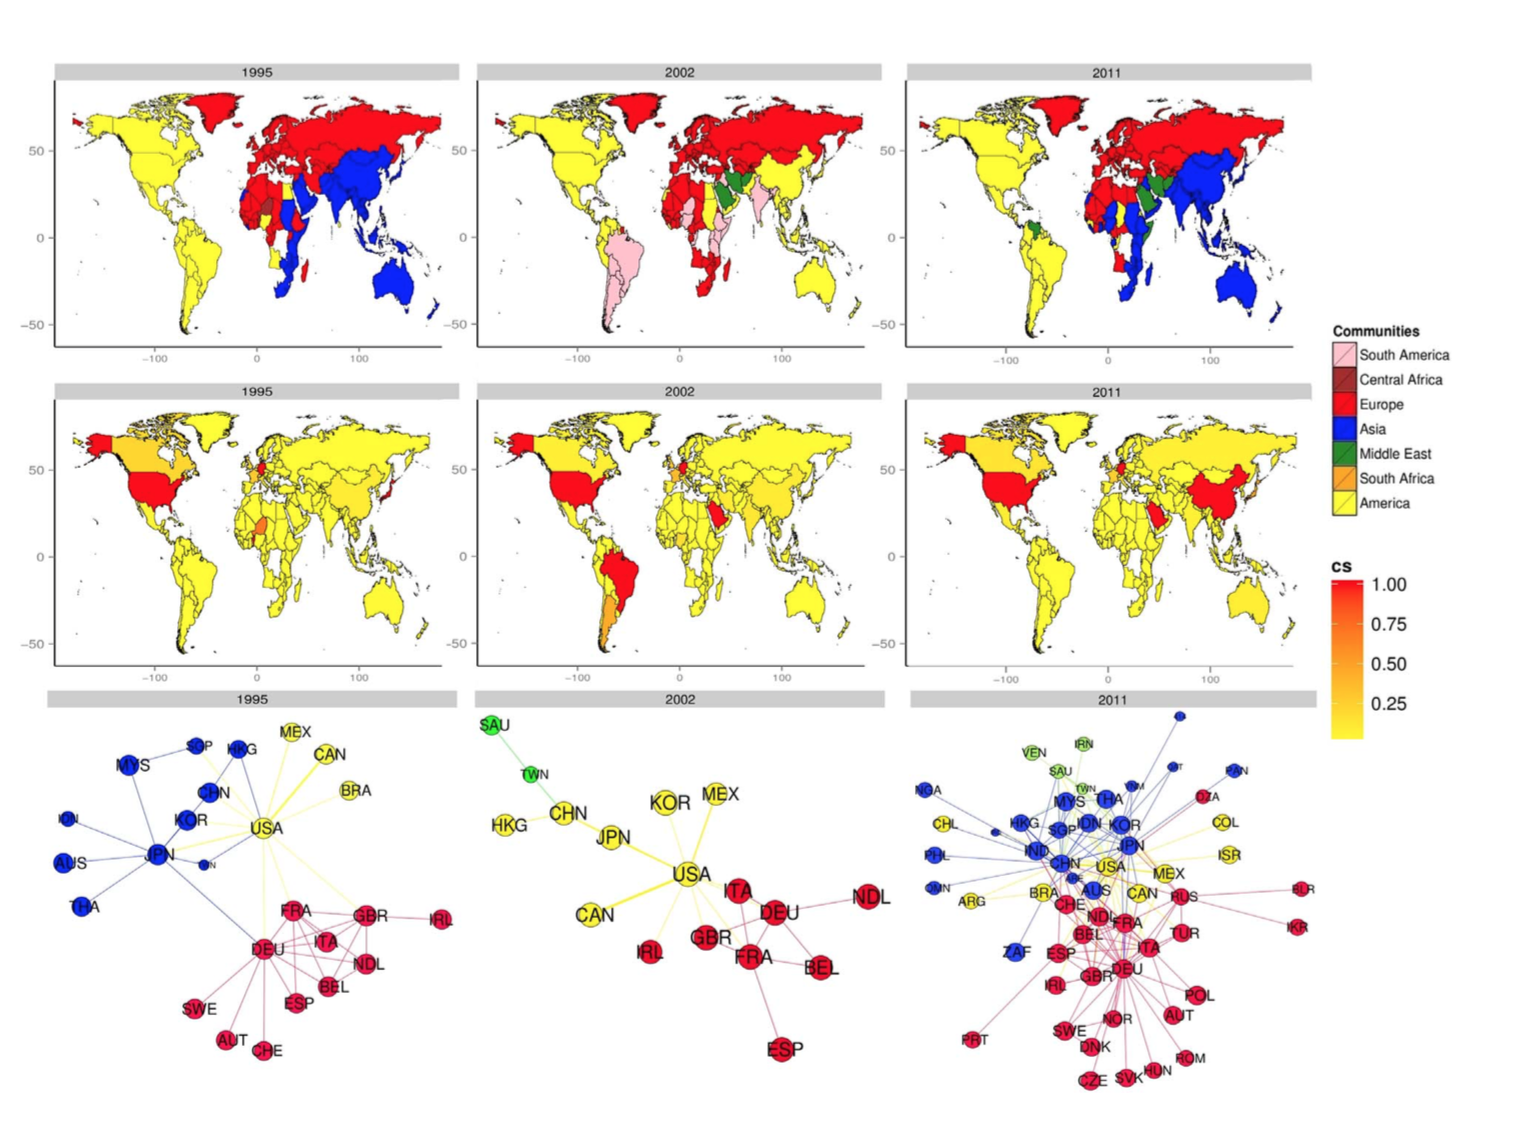 Image for the paper "The rise of China in the international trade network: a community core detection approach"